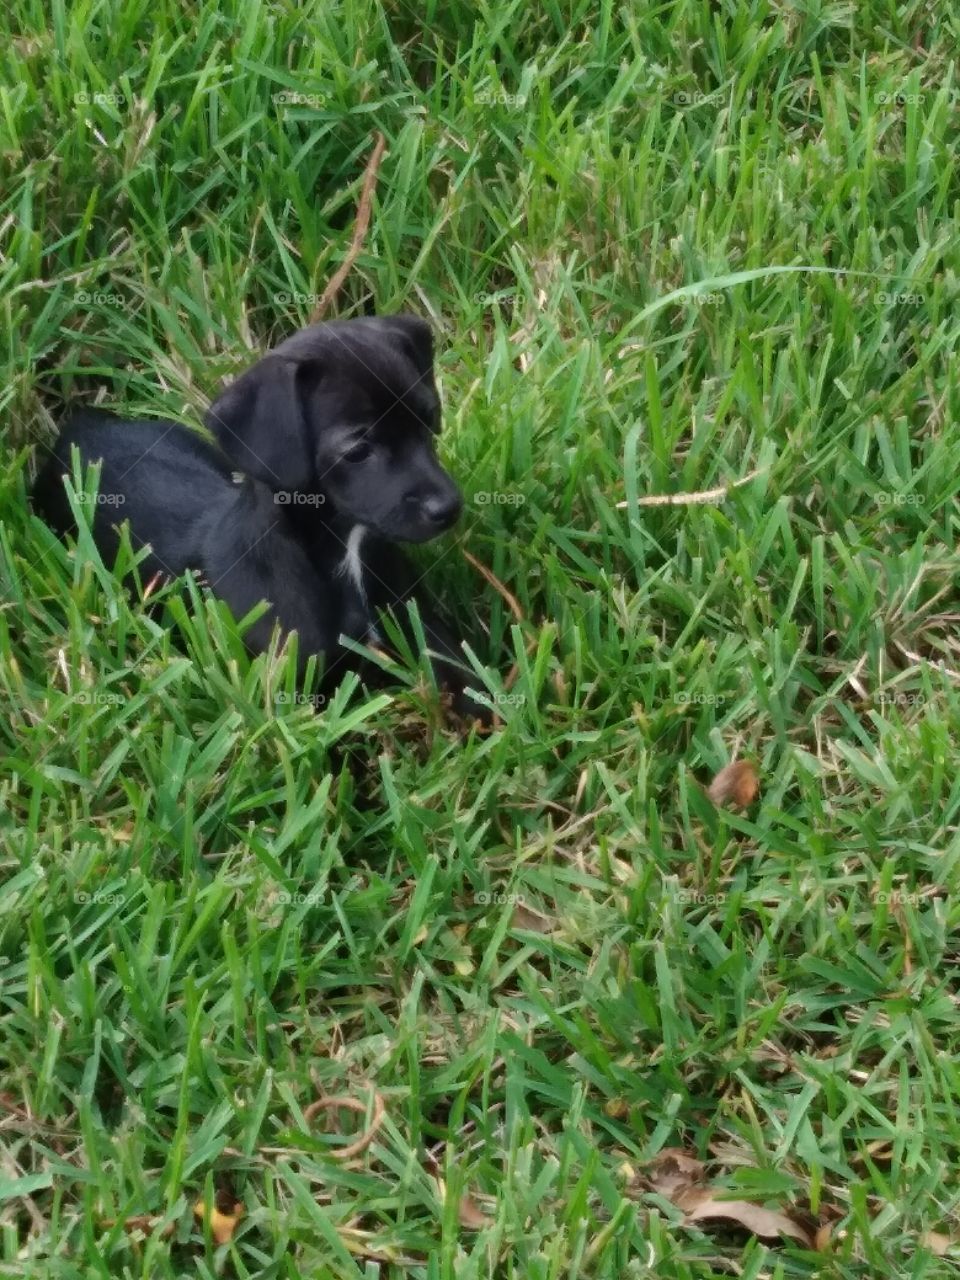 Puppy In The Grass